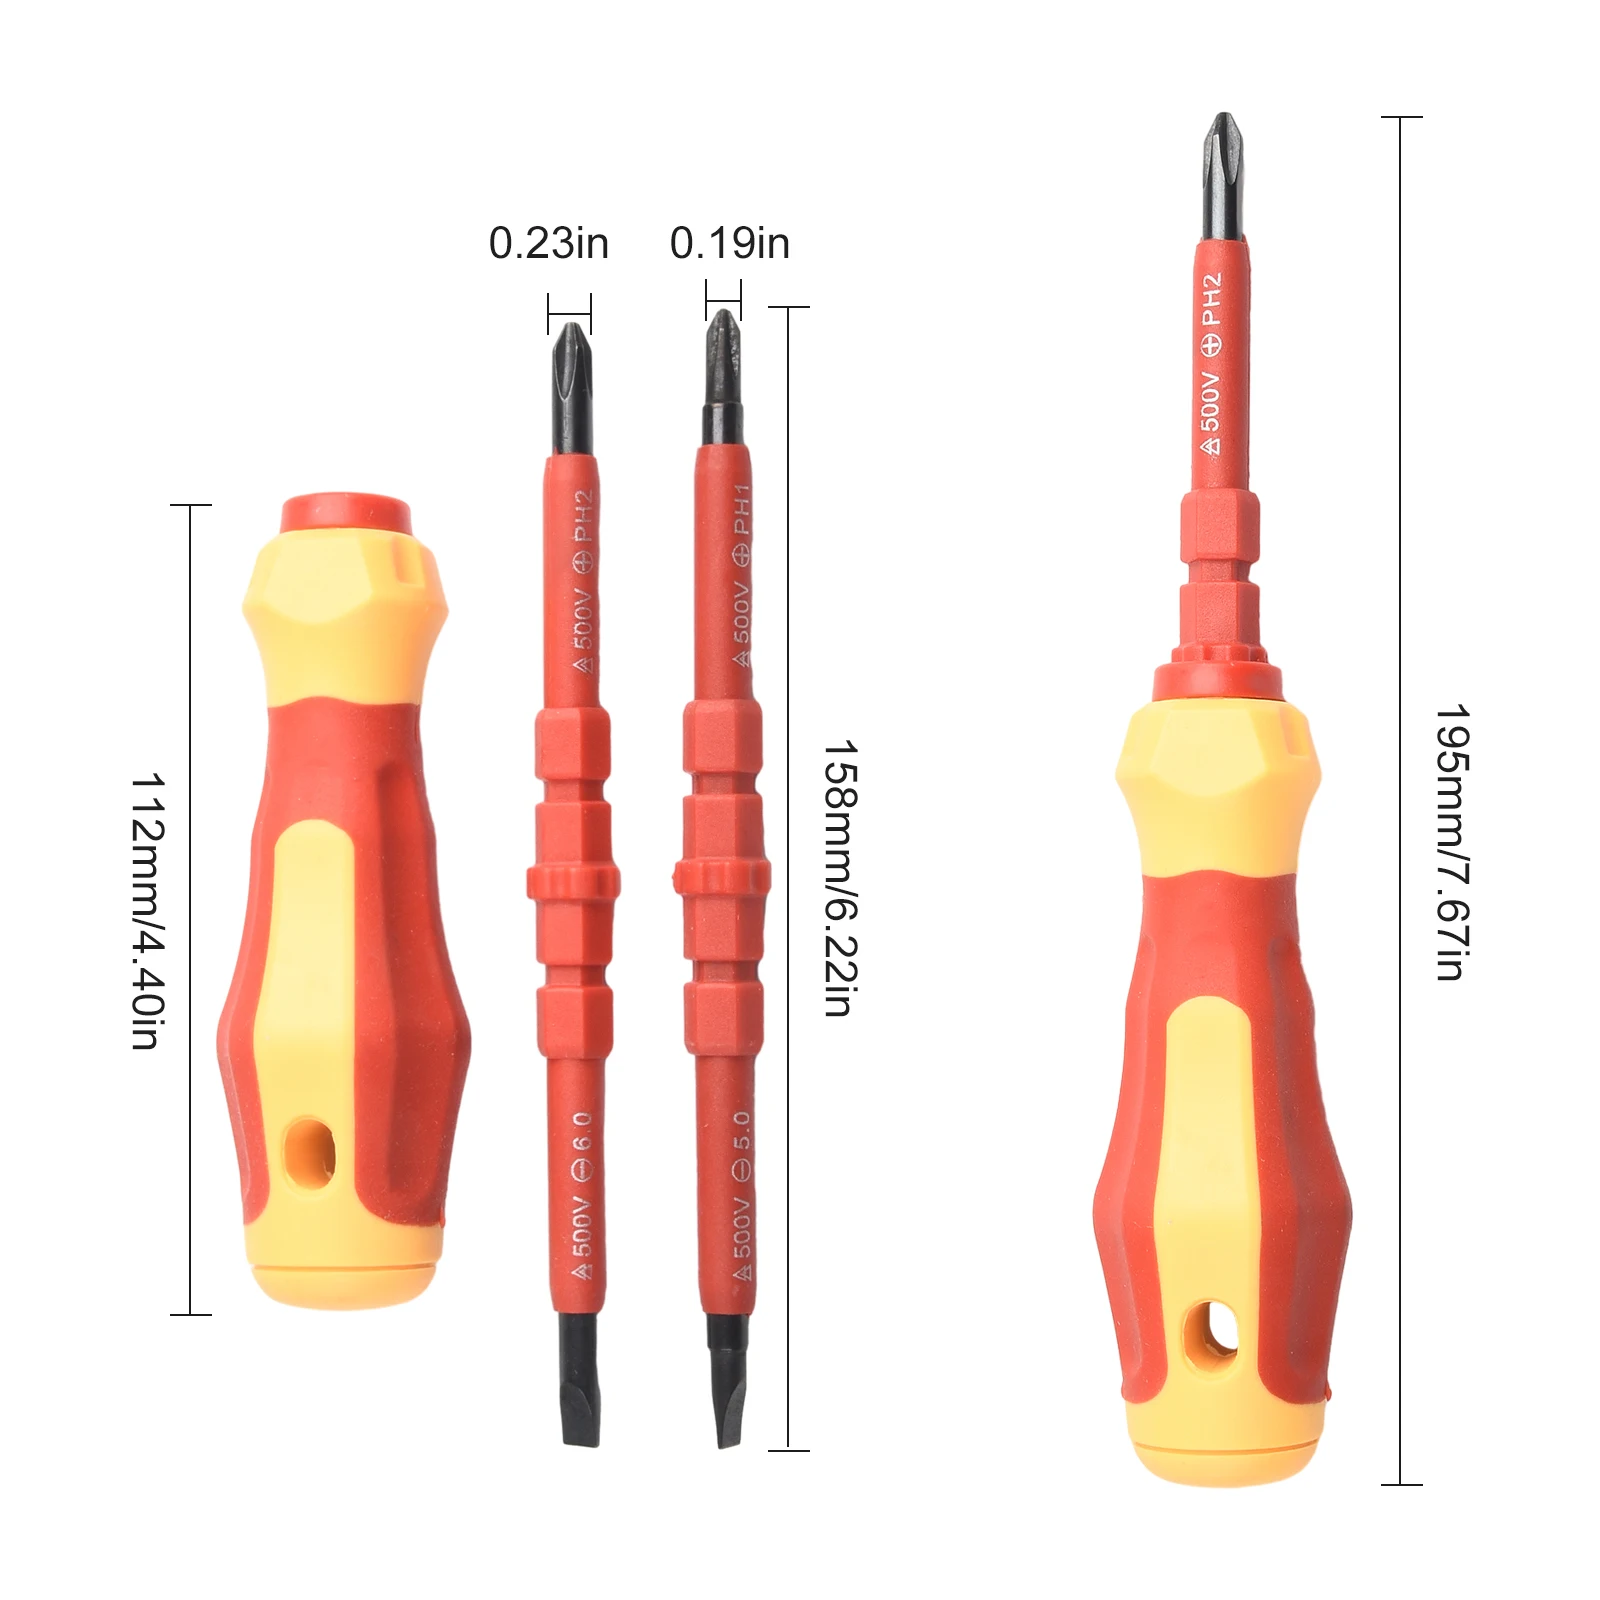 

2Pcs Insulated Screwdriver Set With Magnetic Slotted Cross Bits Electrician Repair Tools Kit With Handle PH1 PH2